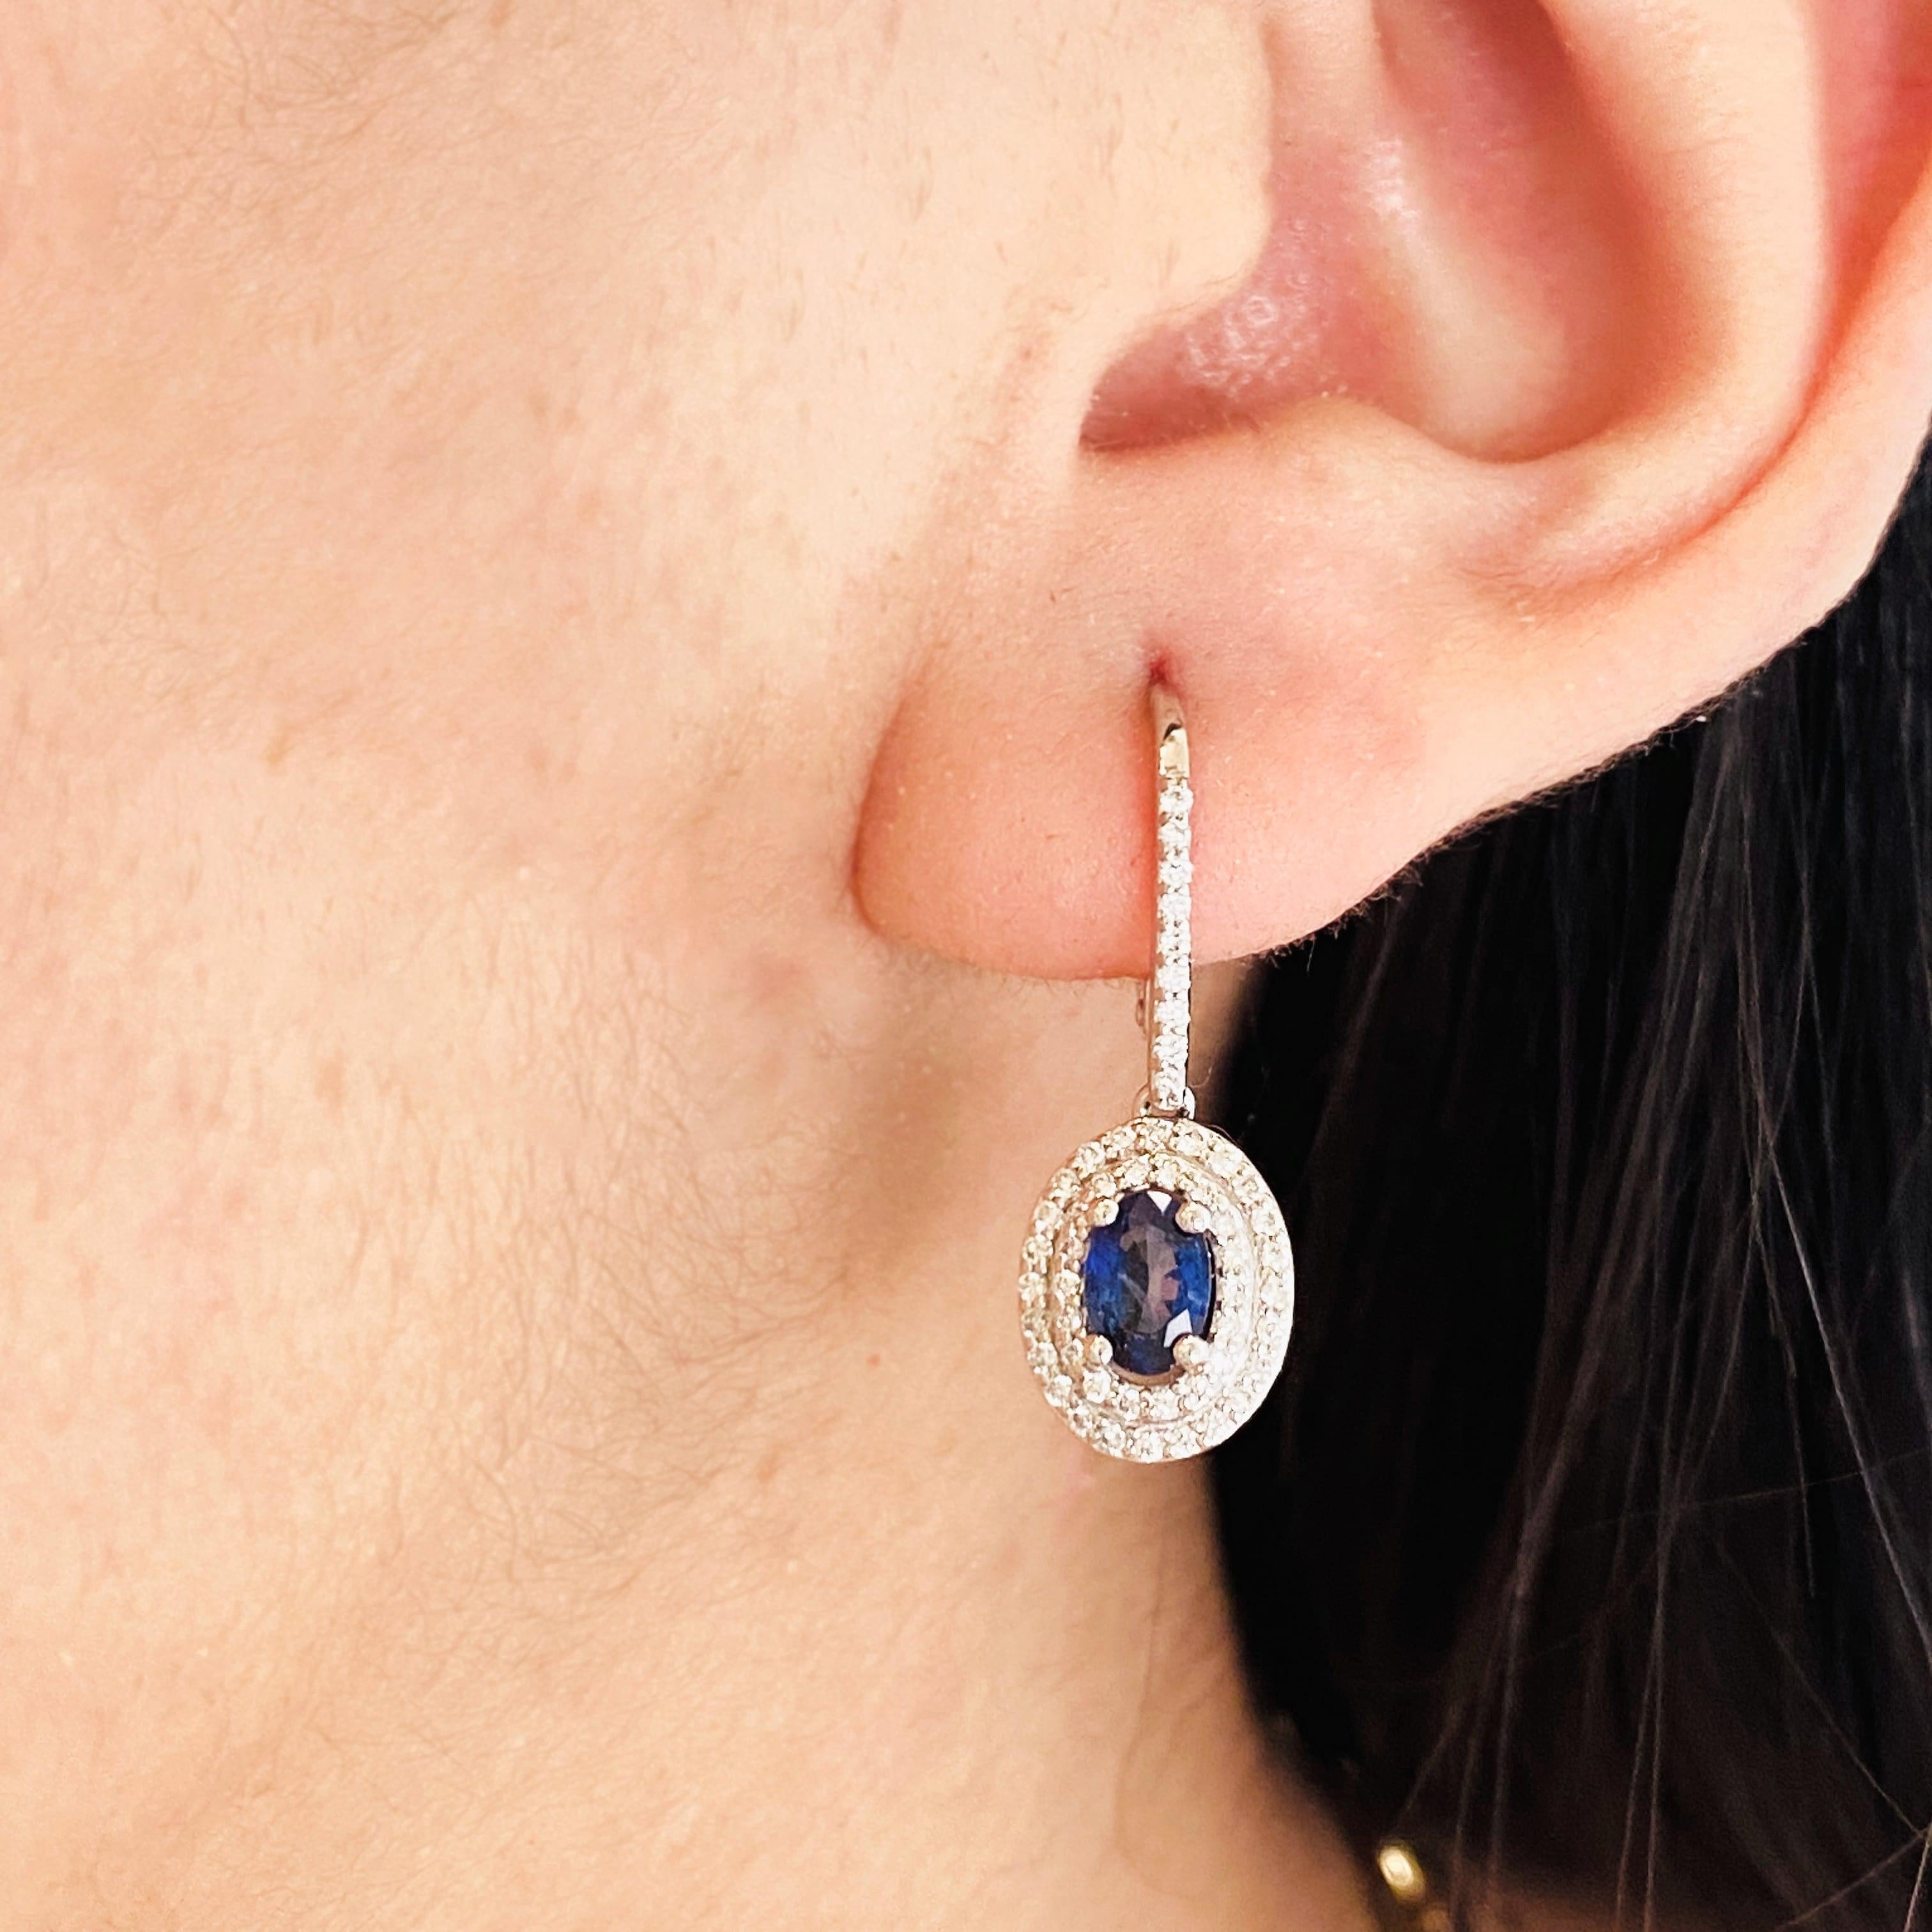 These double halo earrings look stunning for any occasion! Wear them alone or along with other favorite earrings. The bright and rich royal blue of the sapphires is beautifully contrasted with the bright white diamonds and 14 karat white gold. The